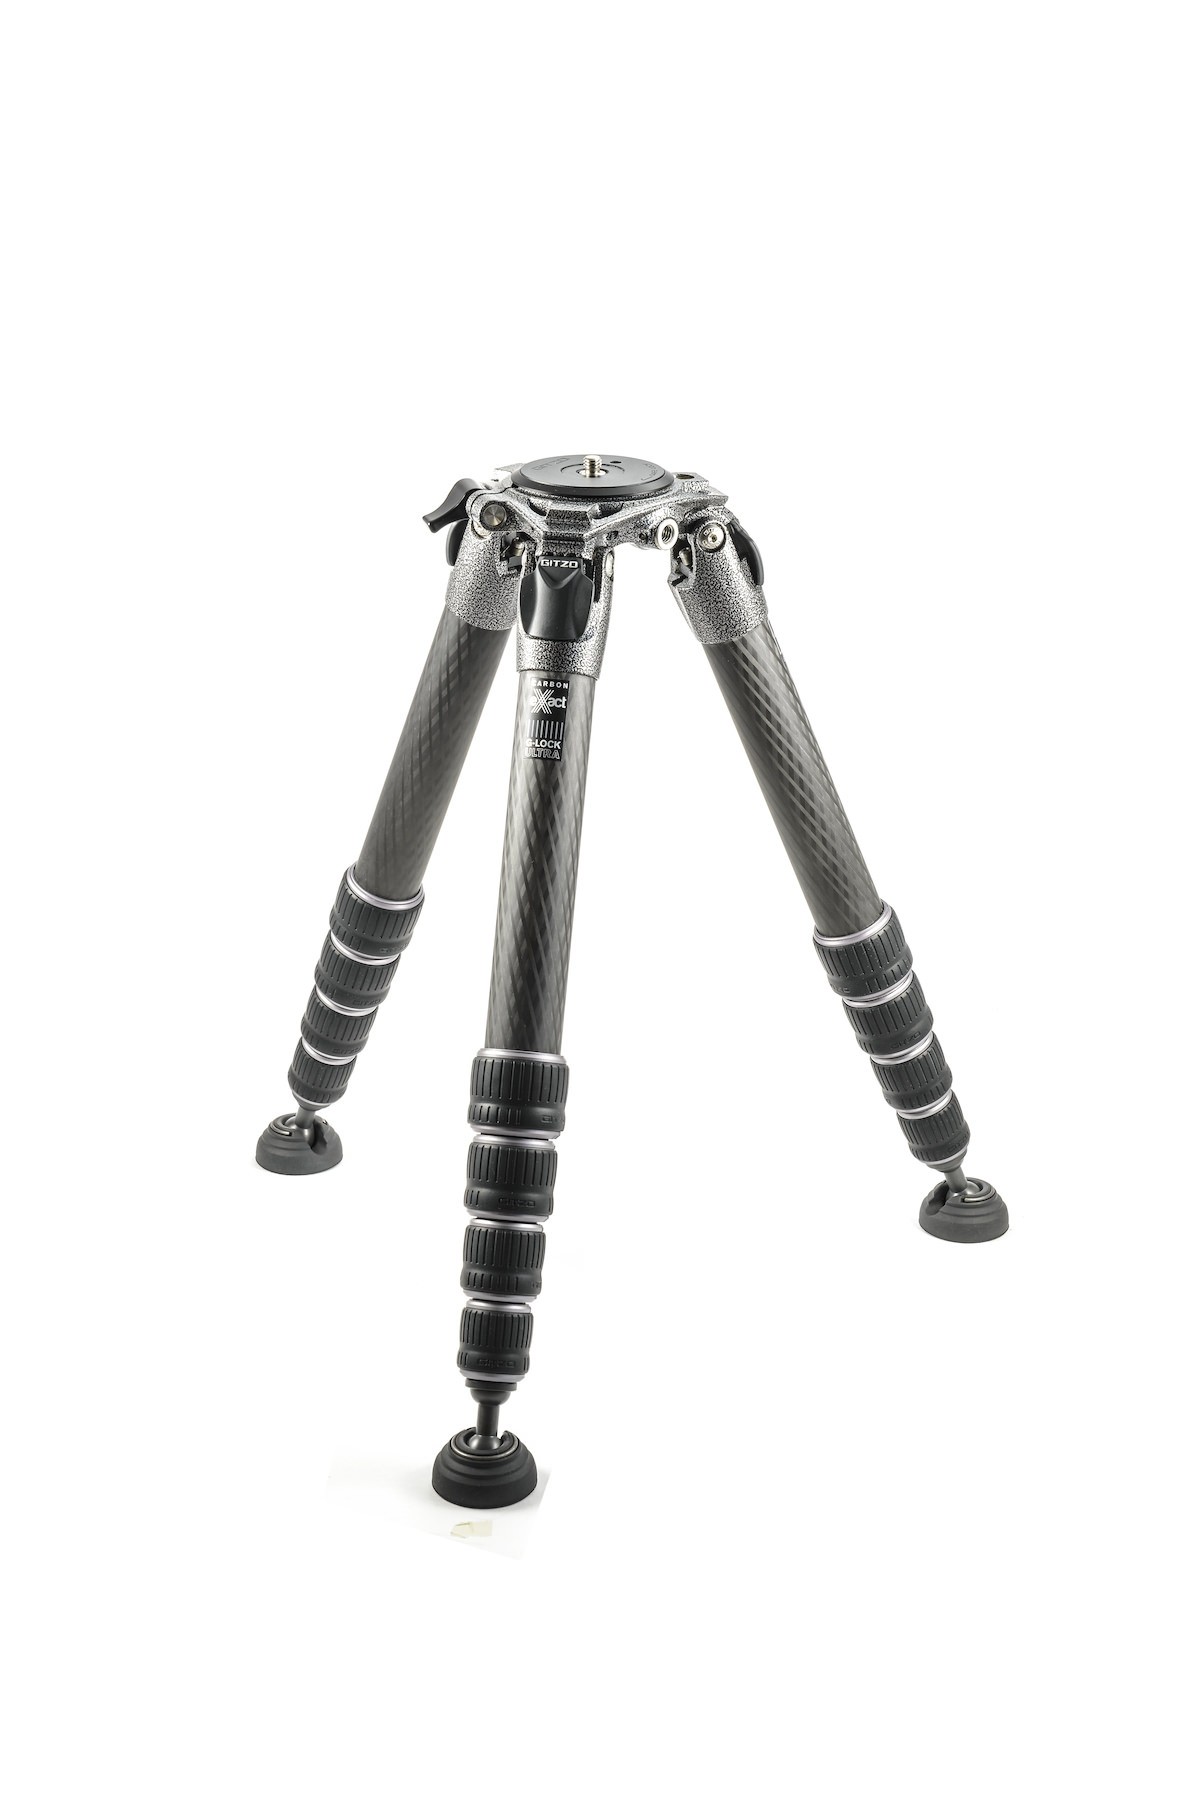 Gitzo tripod Systematic, series 4, 5 sections